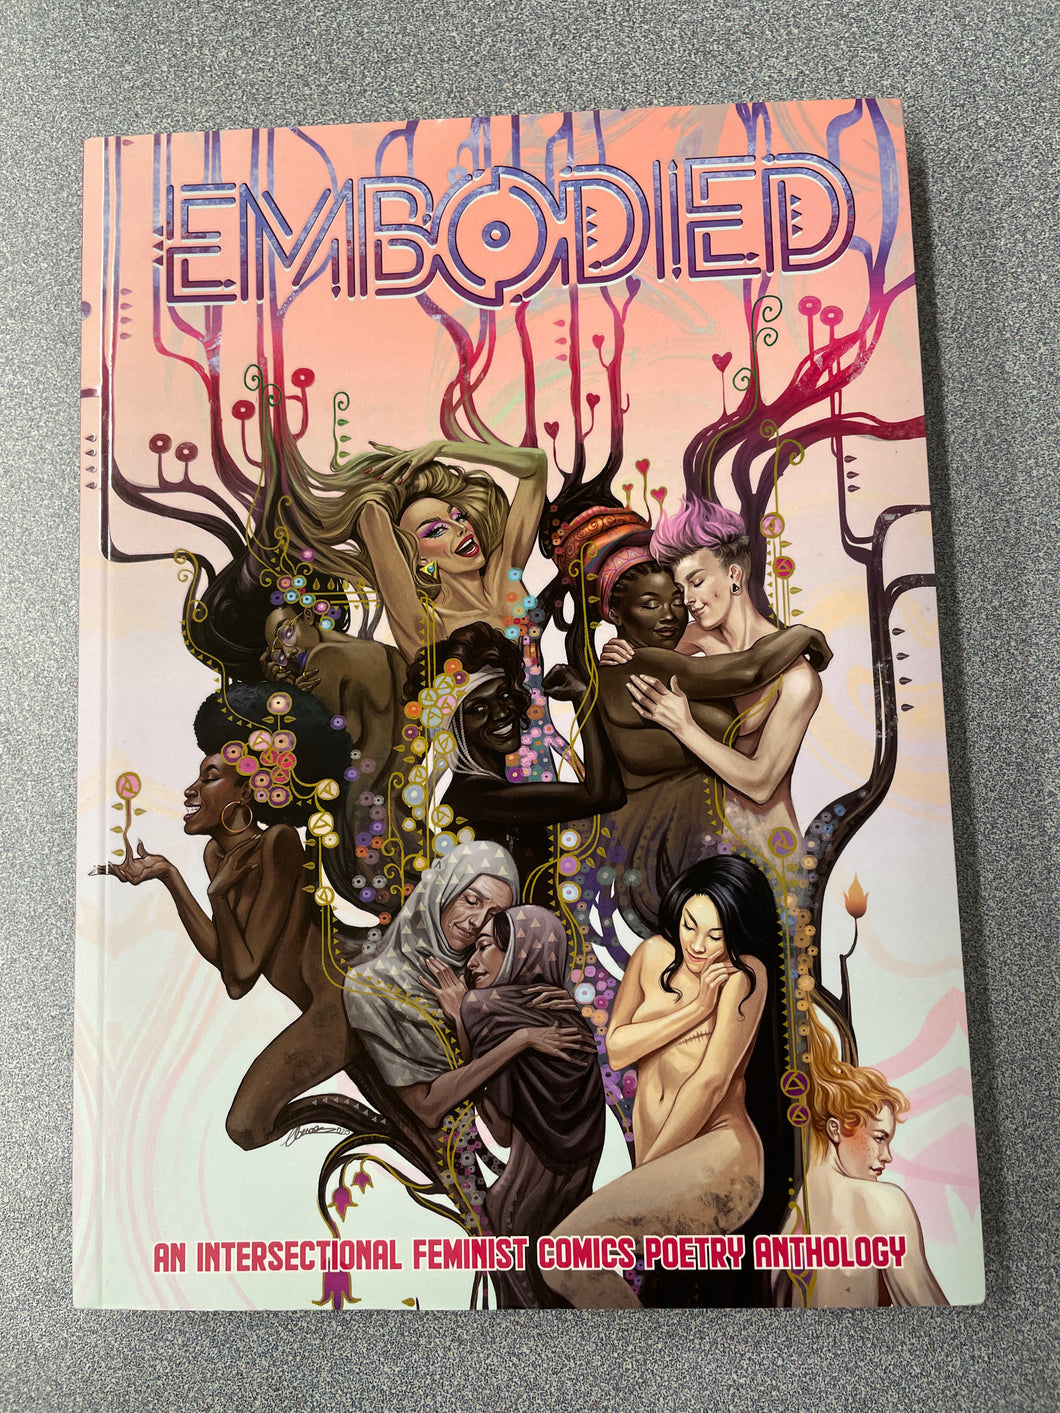 Embodied: An Intersectional Feminist Comics Poetry Anthology, Chin-Tanner, Wendy, ed. [2021] GN 1/24